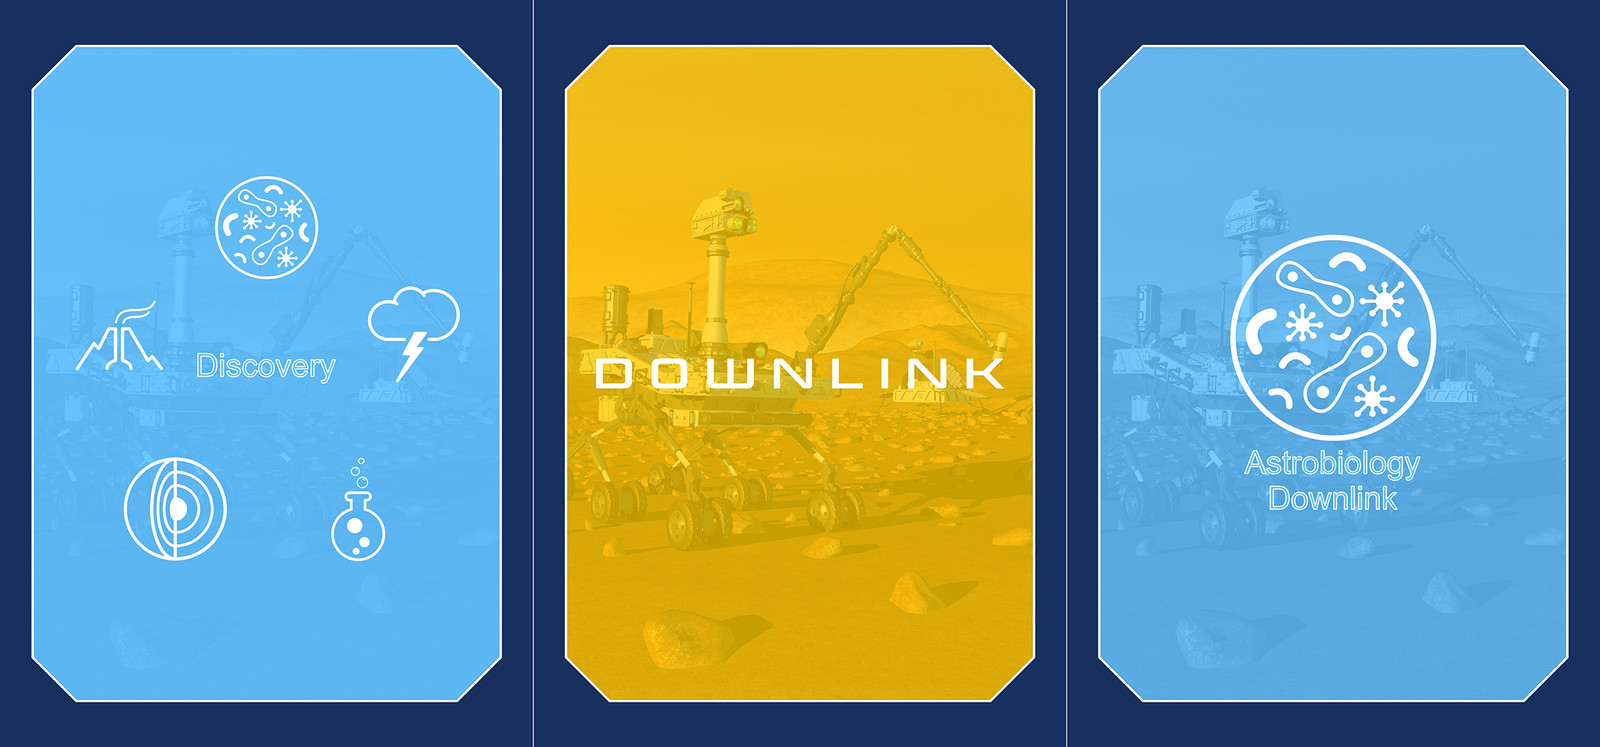 Other cards backs graphic design. From left to right, Discovery Cards, Playing Cards, and one example of Downlink cards.